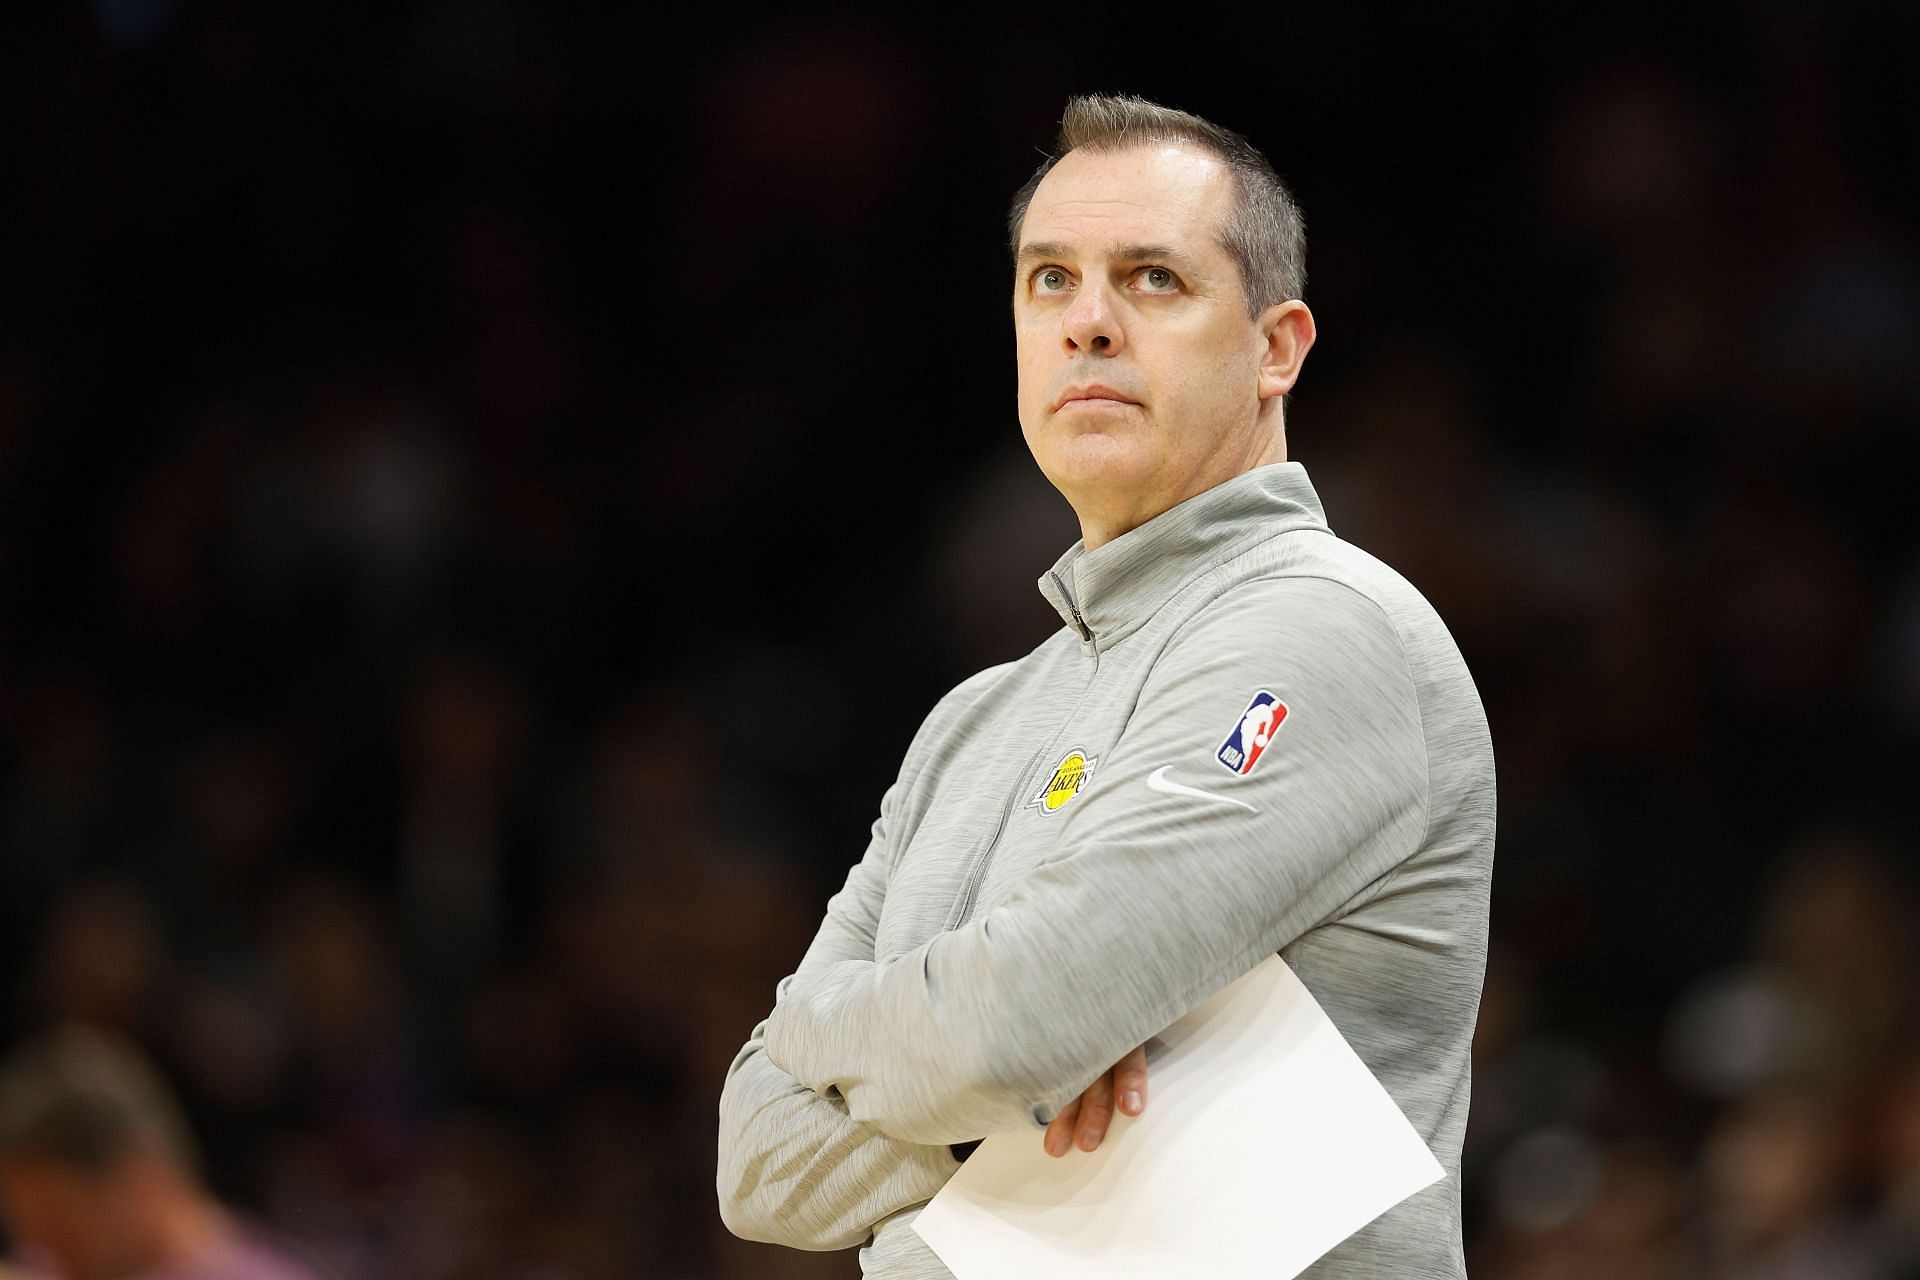 Head coach Frank Vogel of the Los Angeles Lakers reacts during the second half of the NBA game against the Phoenix Suns at Footprint Center on April 05, 2022 in Phoenix, Arizona. The Suns defeated the Lakers 121-110.